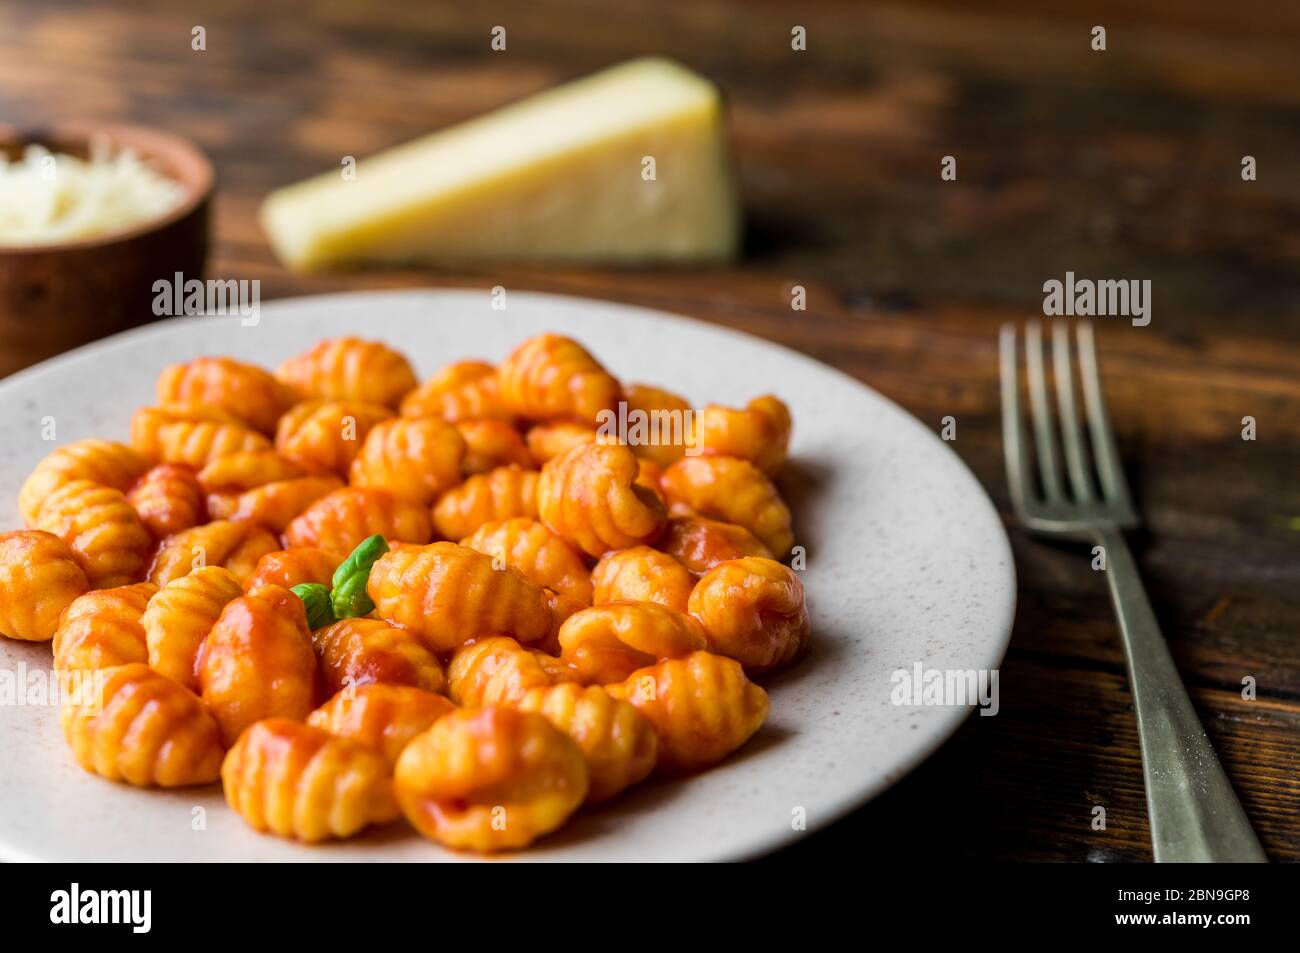 Gnocchi with tomato sauce, basil, and cheese, traditional Italian pasta food. Stock Photo